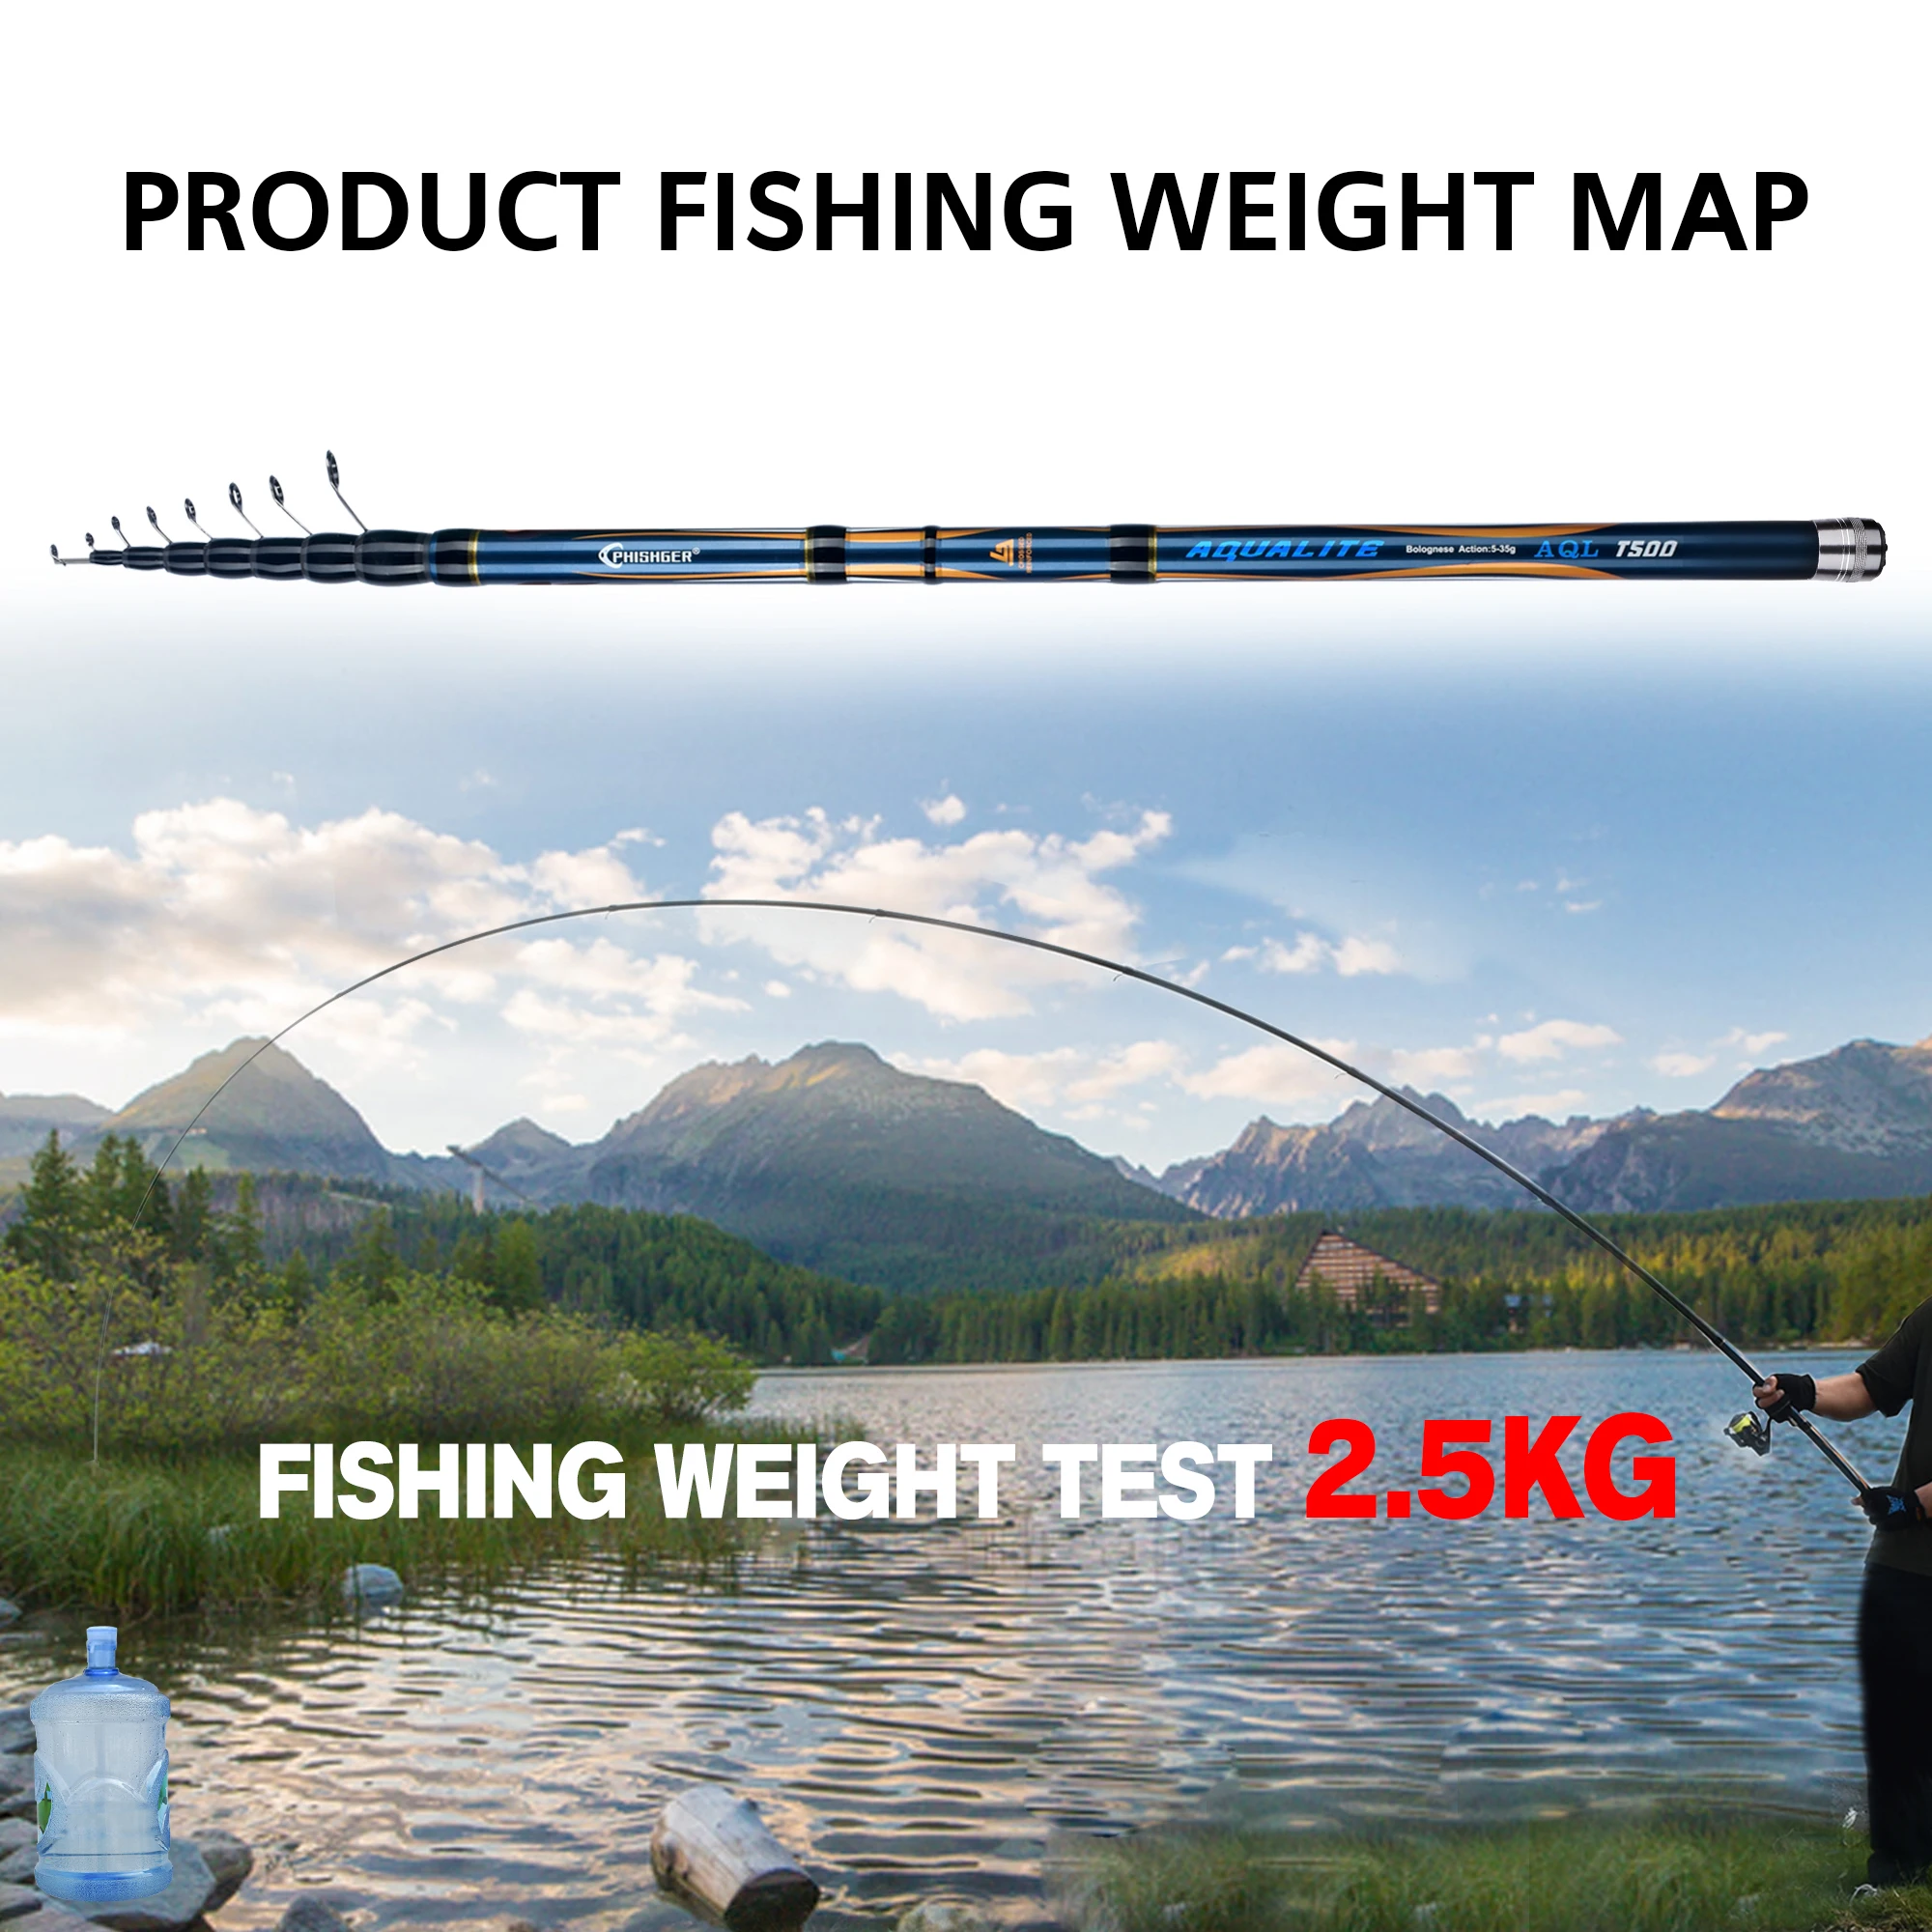 PHISHGER Telescopic Bolognese Trout Fishing Rod 4/4.5/5/5.5/6m 30T Carbon  Float 5-35g Ultralight Surf Spinning Travel Fast Pole